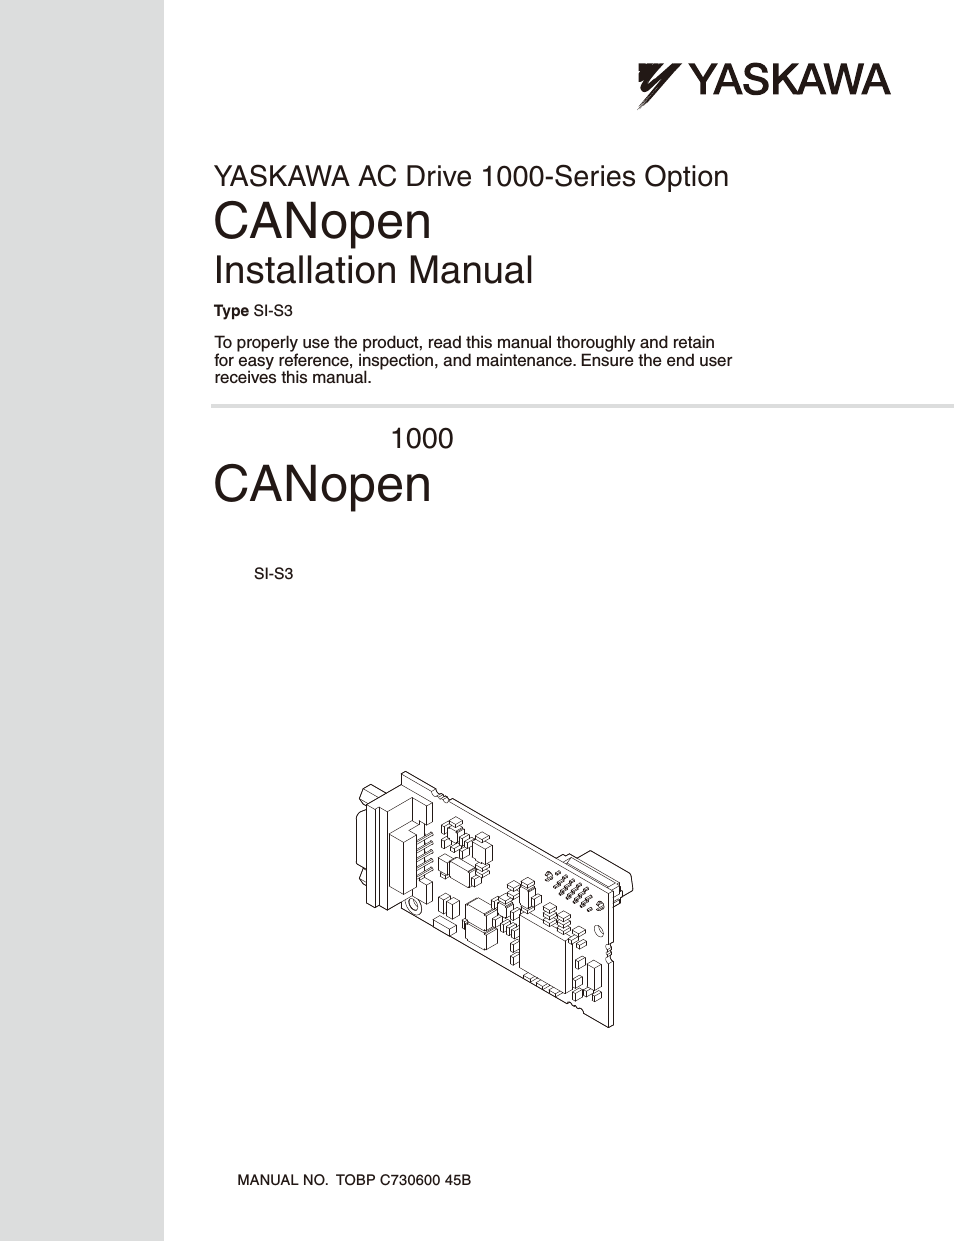 1000 Series Drive Option - CANopen